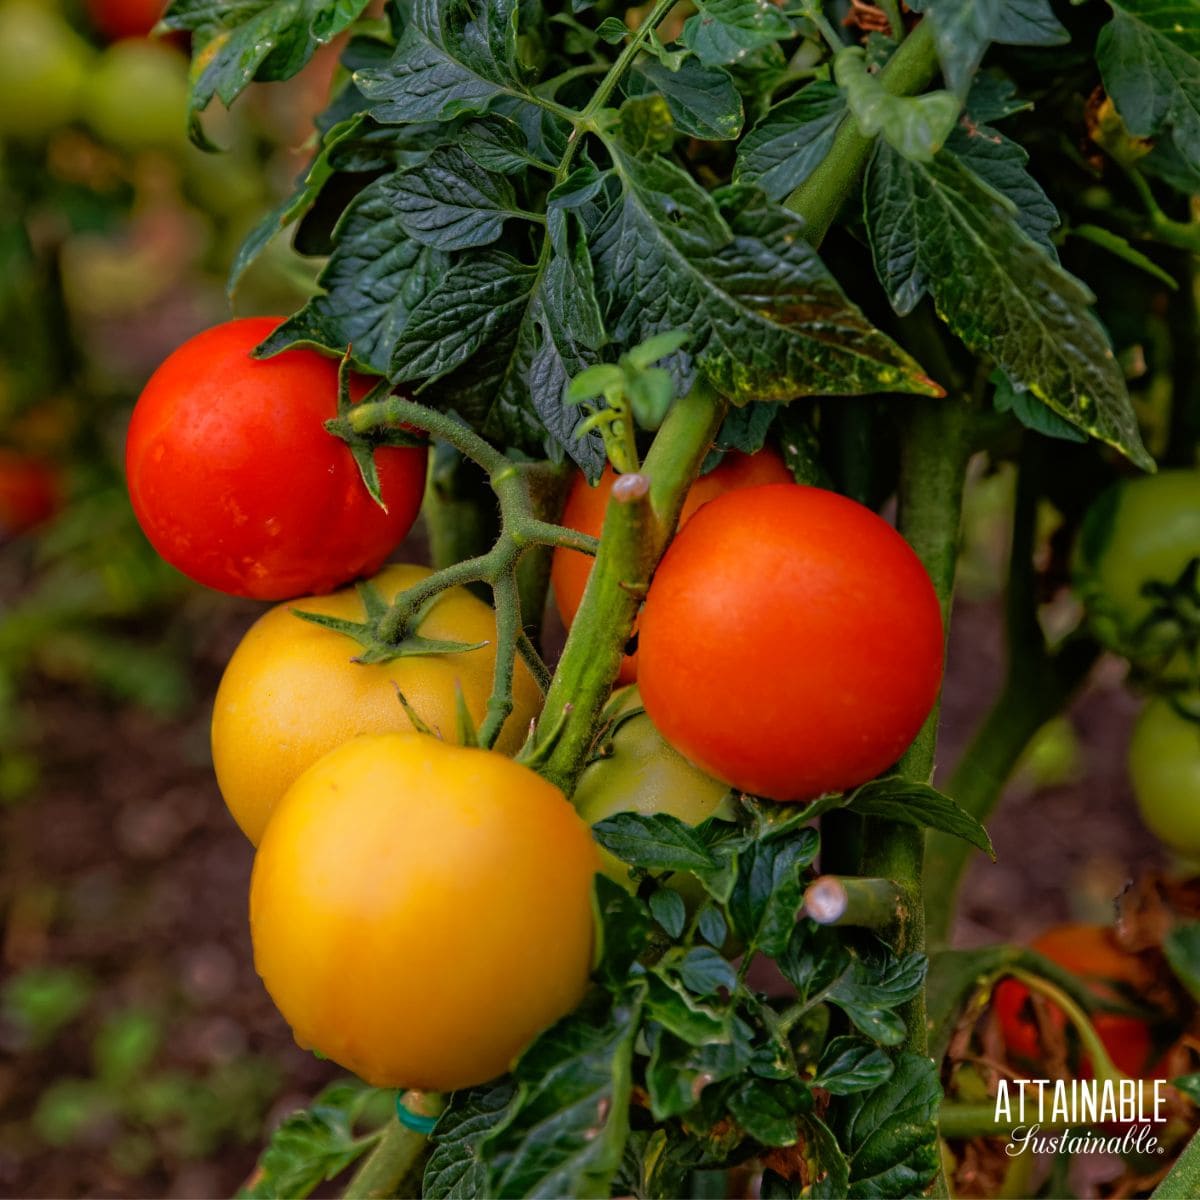 red ripe and yellow ripening tomatoes on a plant.